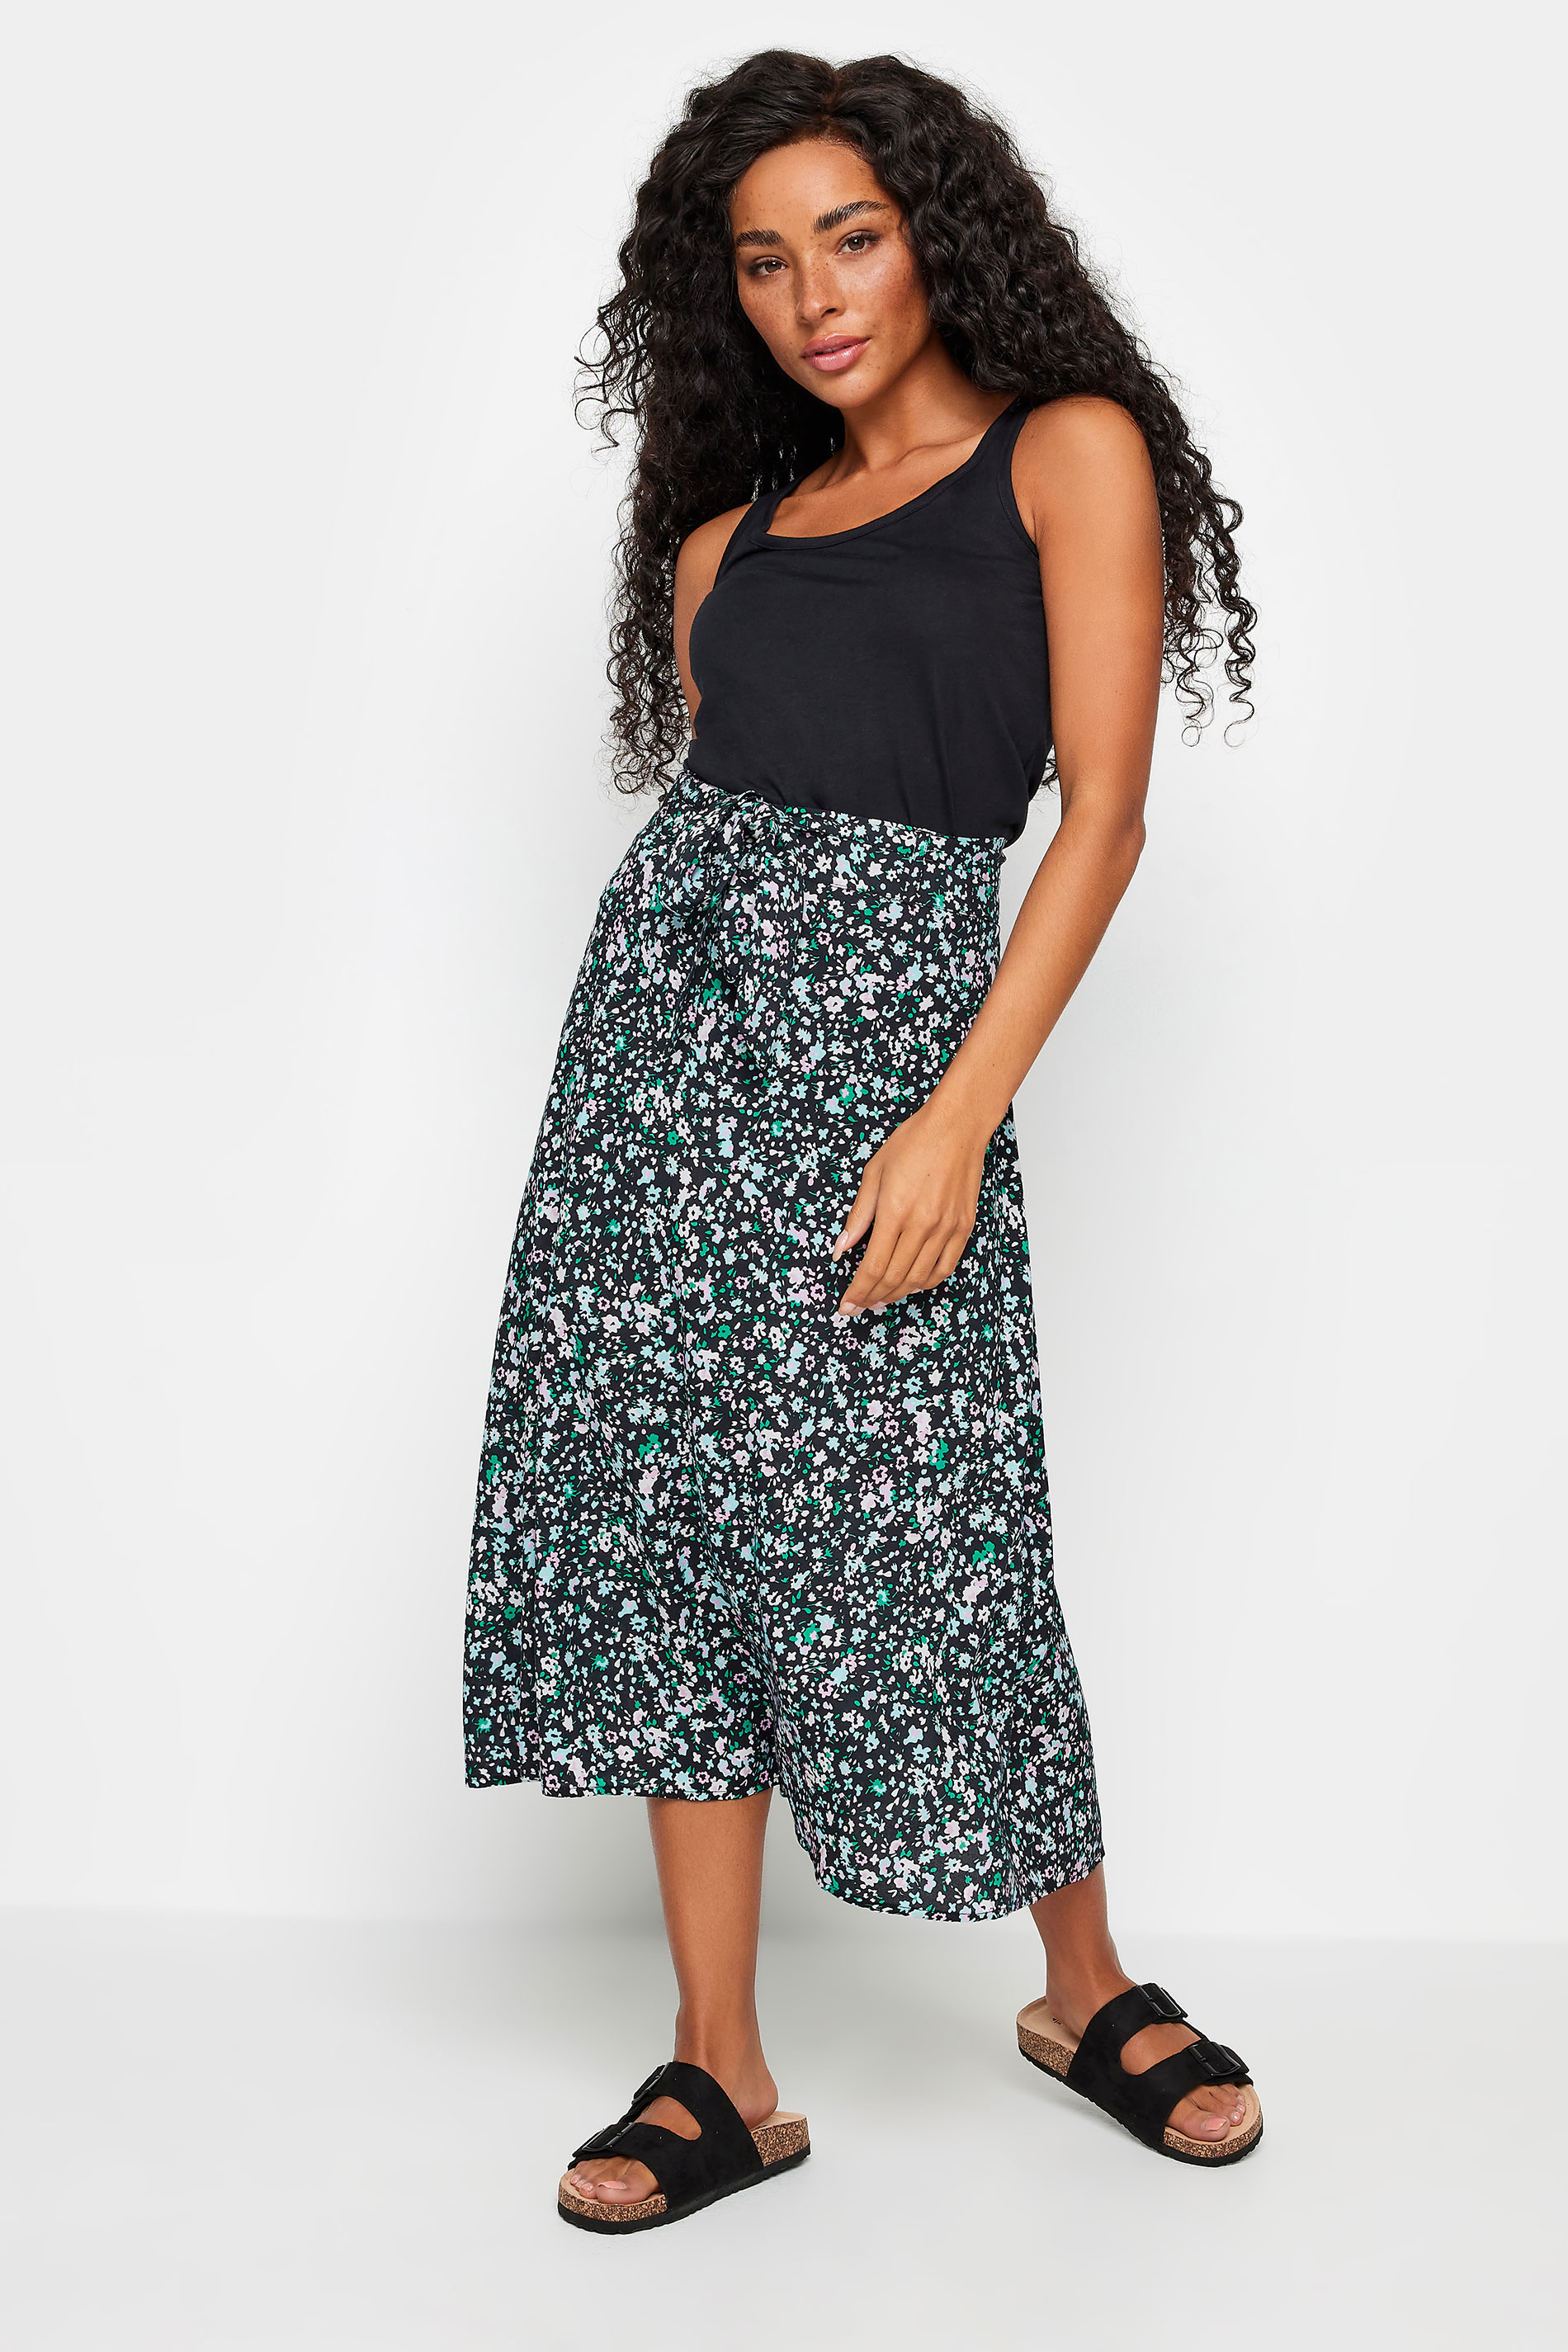 M&Co Petite Black Ditsy Floral Print Belted Midi Skirt | M&Co 2